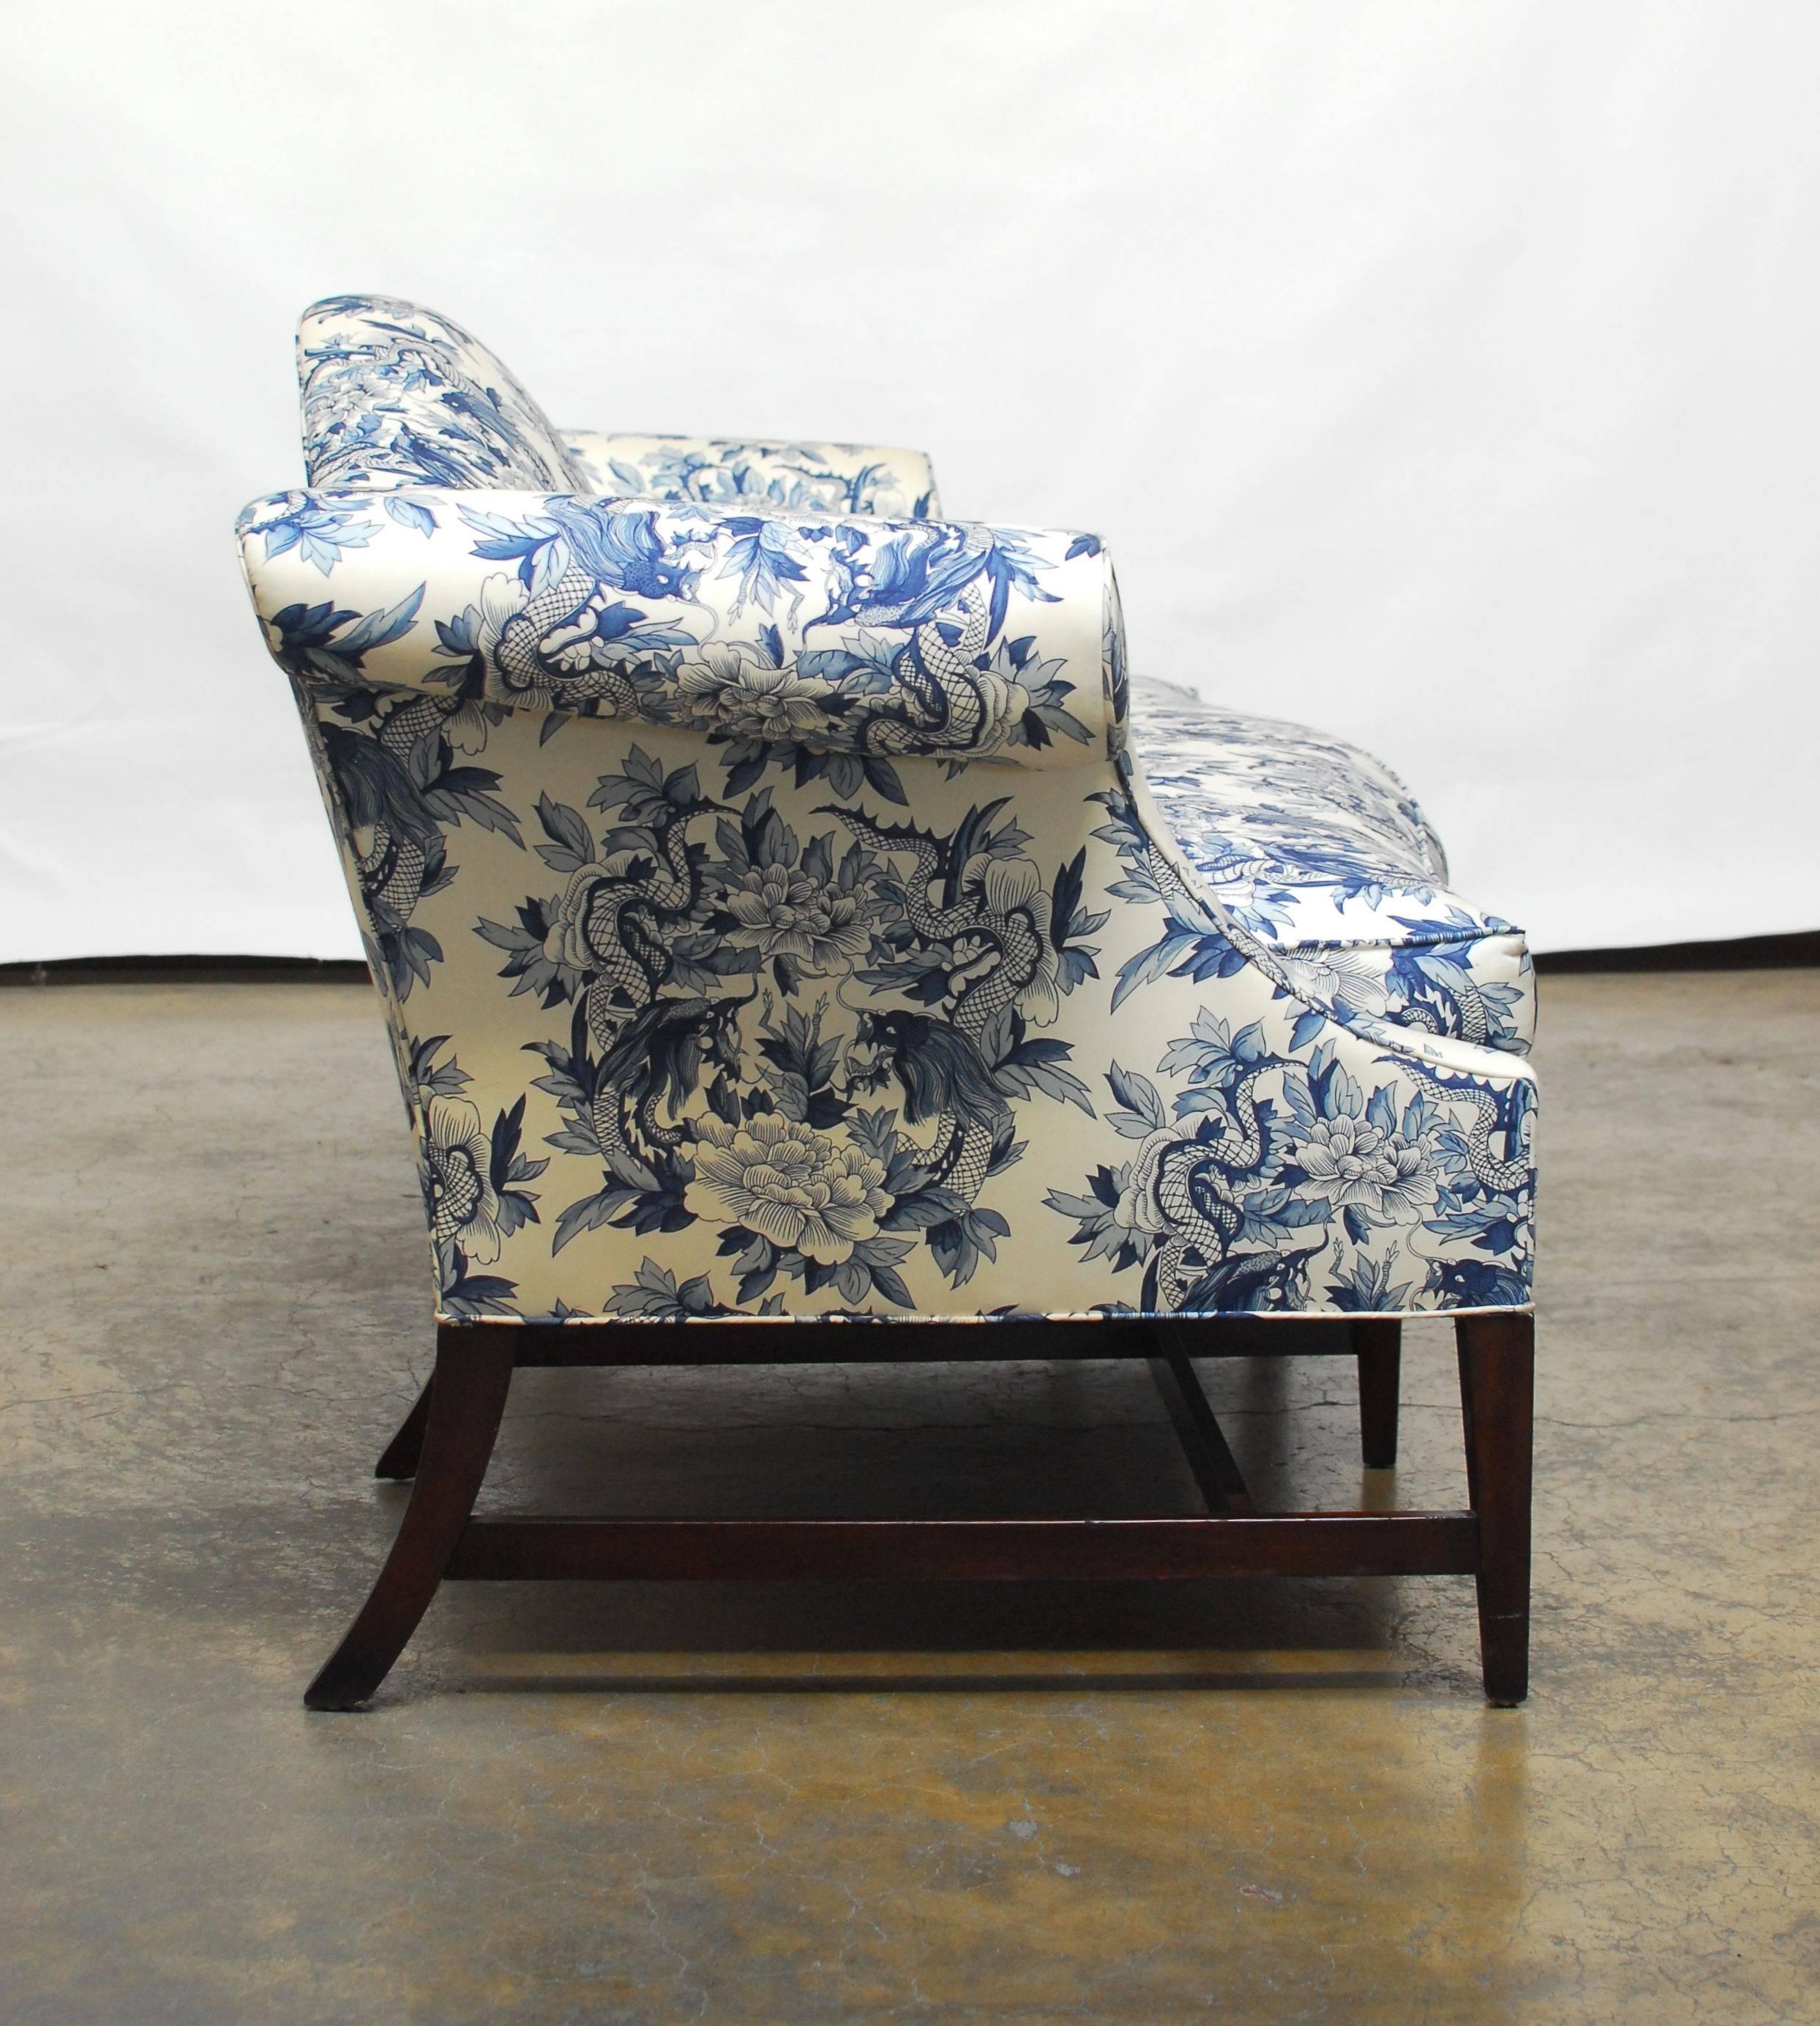 American Chippendale Style Camelback Sofa with Chinoiserie Dragon Upholstery